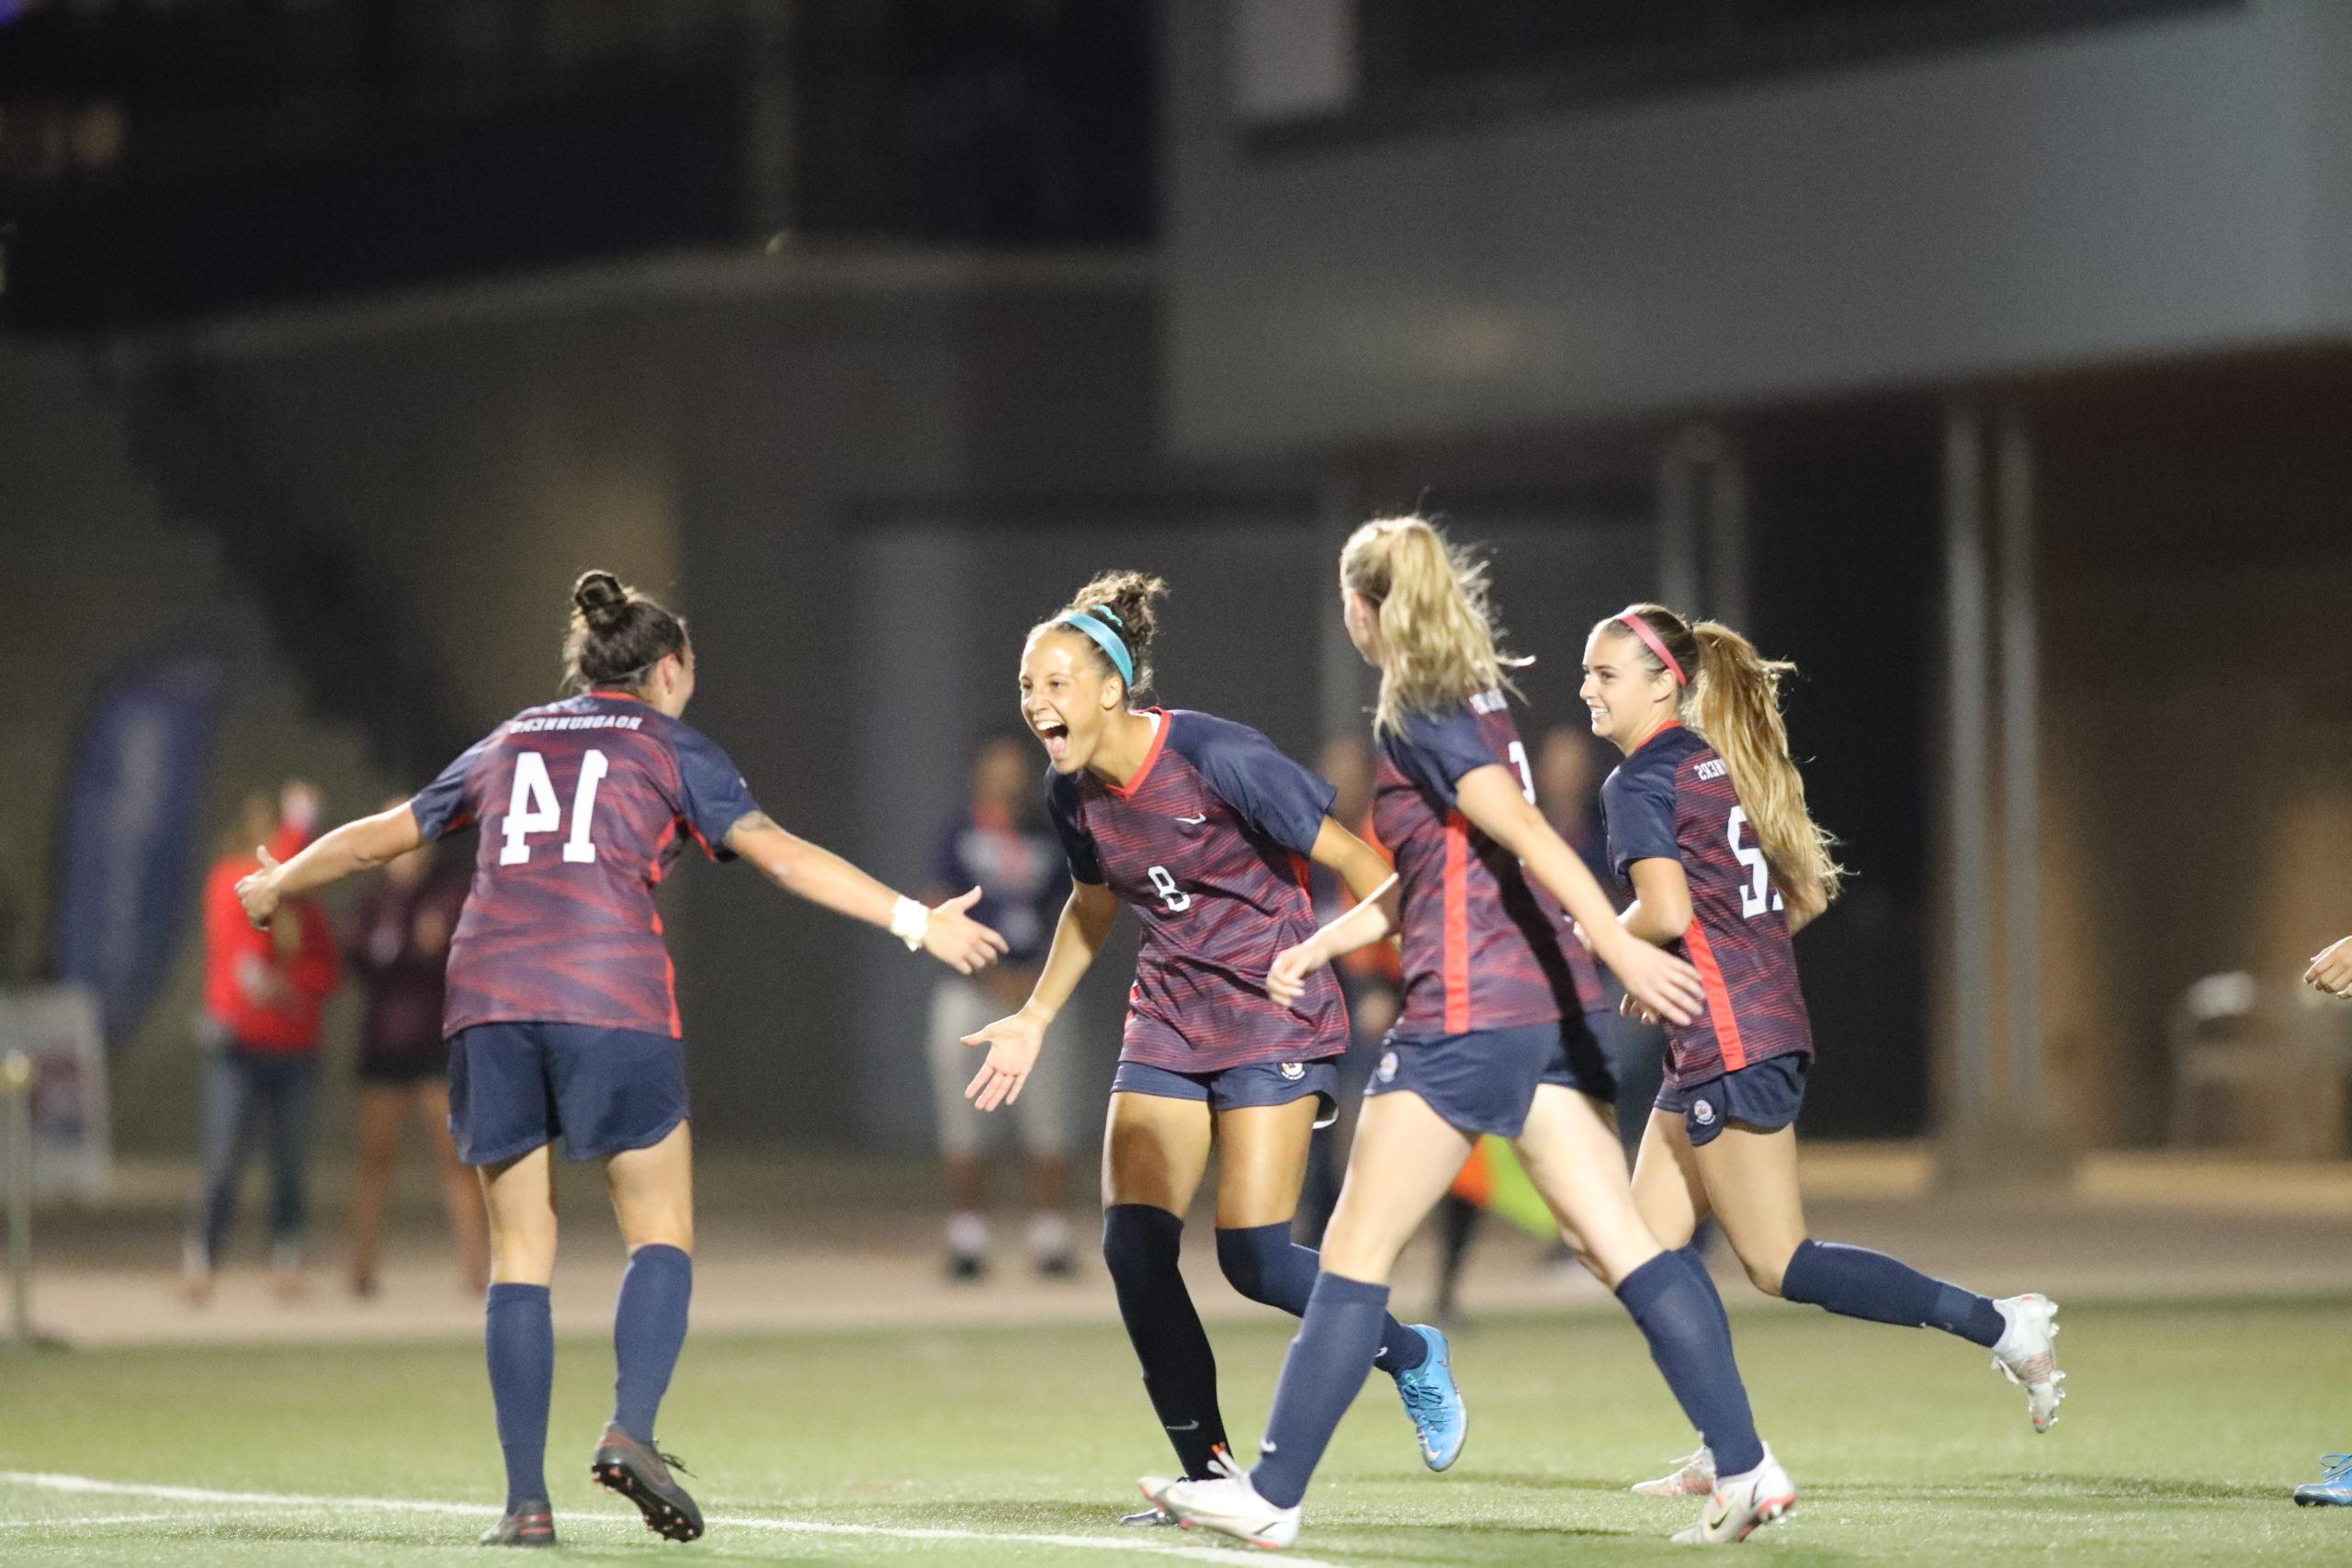 Women's soccer player Elisa Dean celebrates a goal during a night game in 2021.